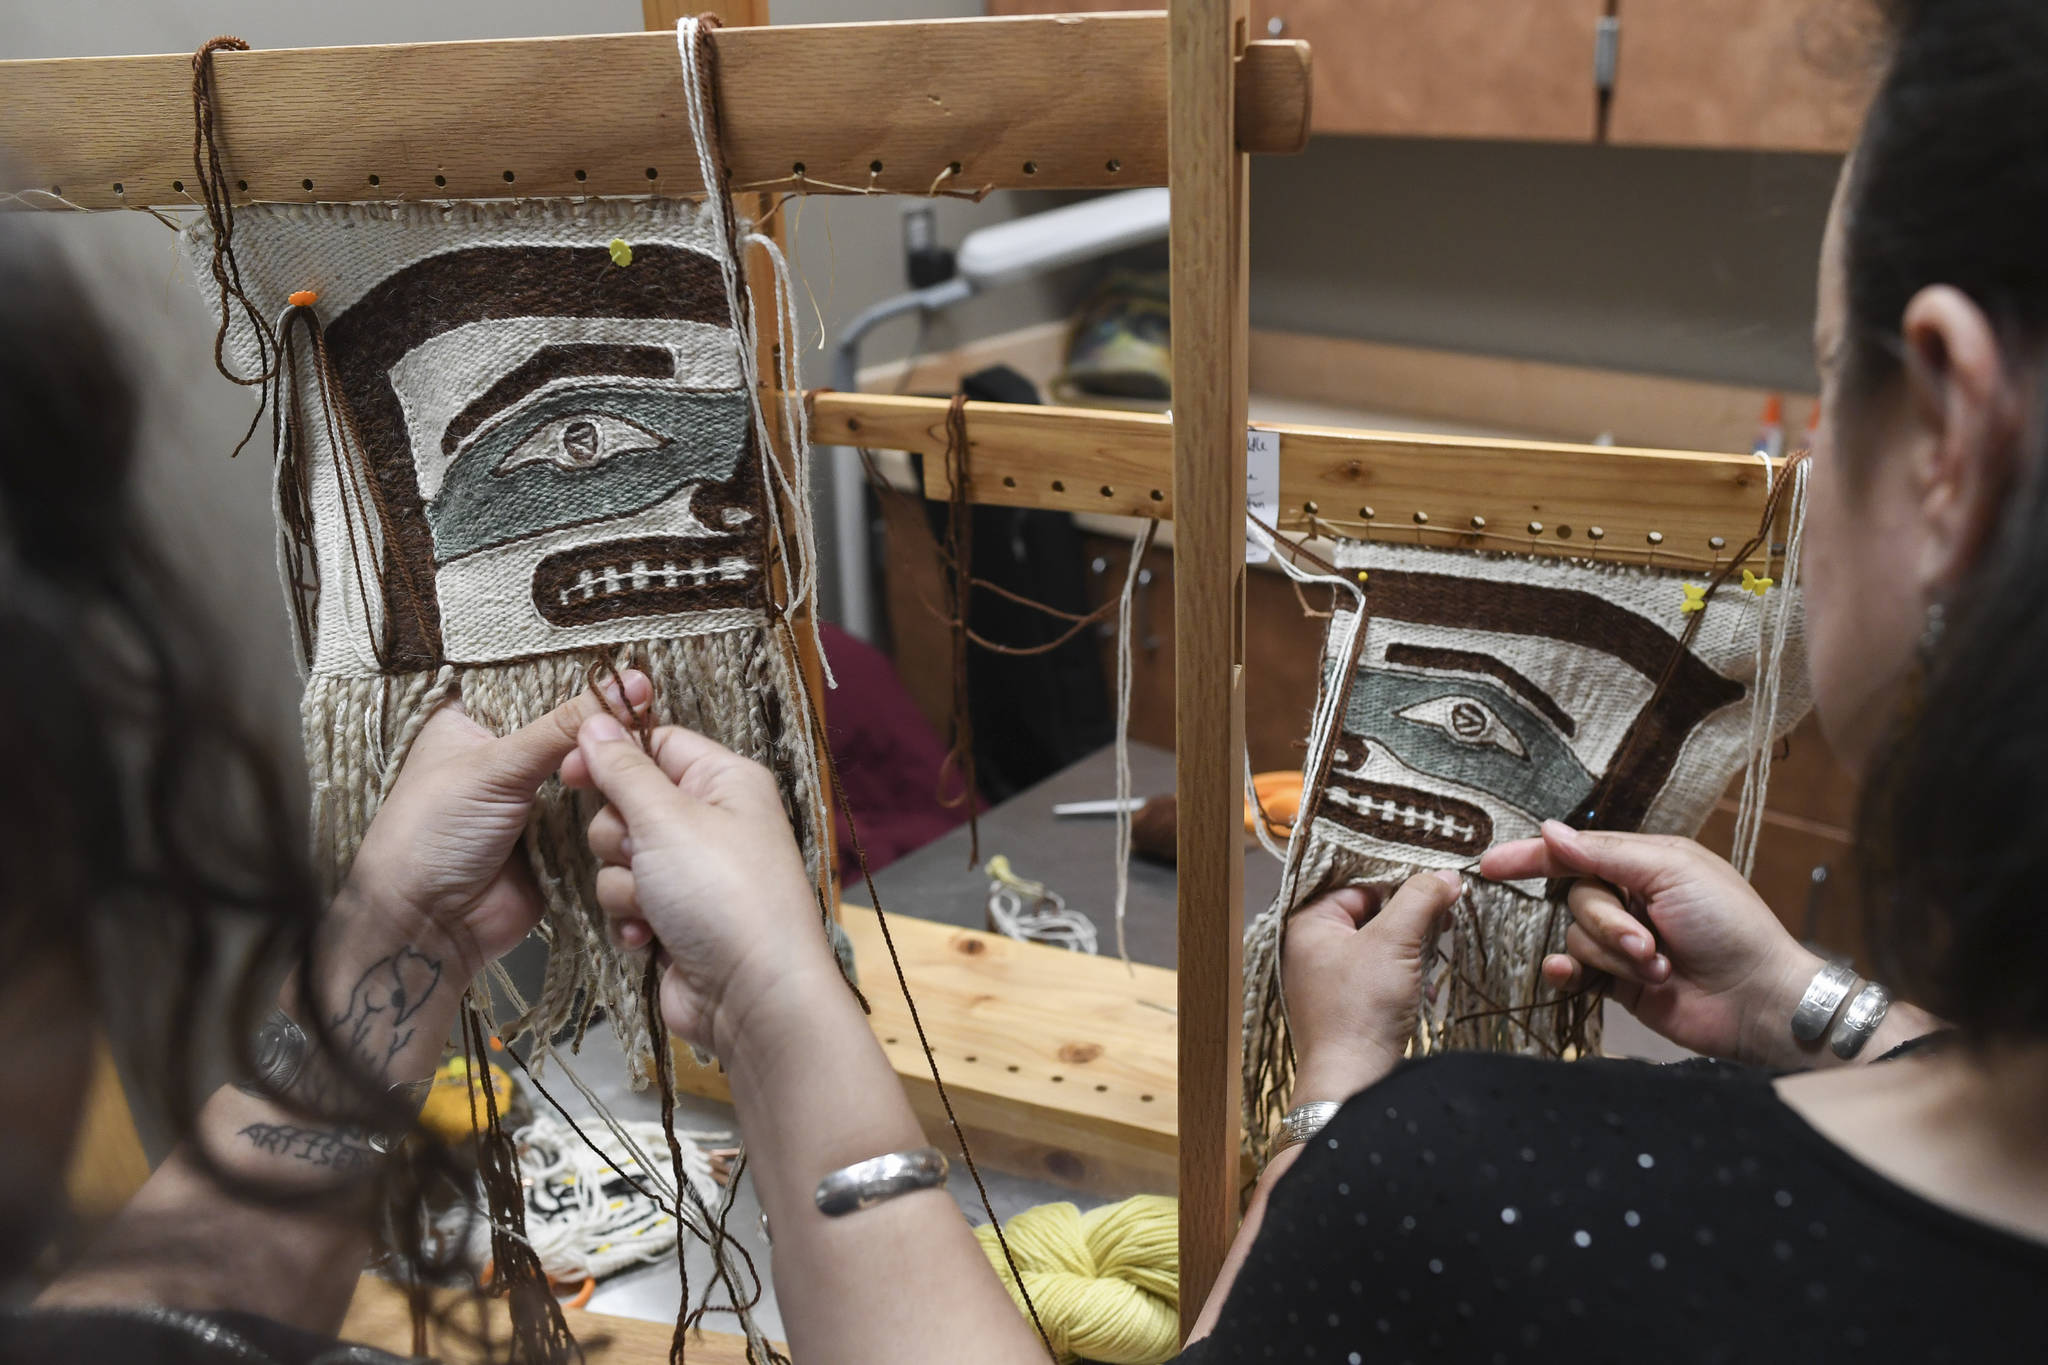 Anastasia Hobson-George, left, works with weaver Lily Hope on Chilkat legging weavings as the Artist-in-Residence at the Walter Soboleff Center on Wednesday, May 22, 2019. (Michael Penn | Juneau Empire)